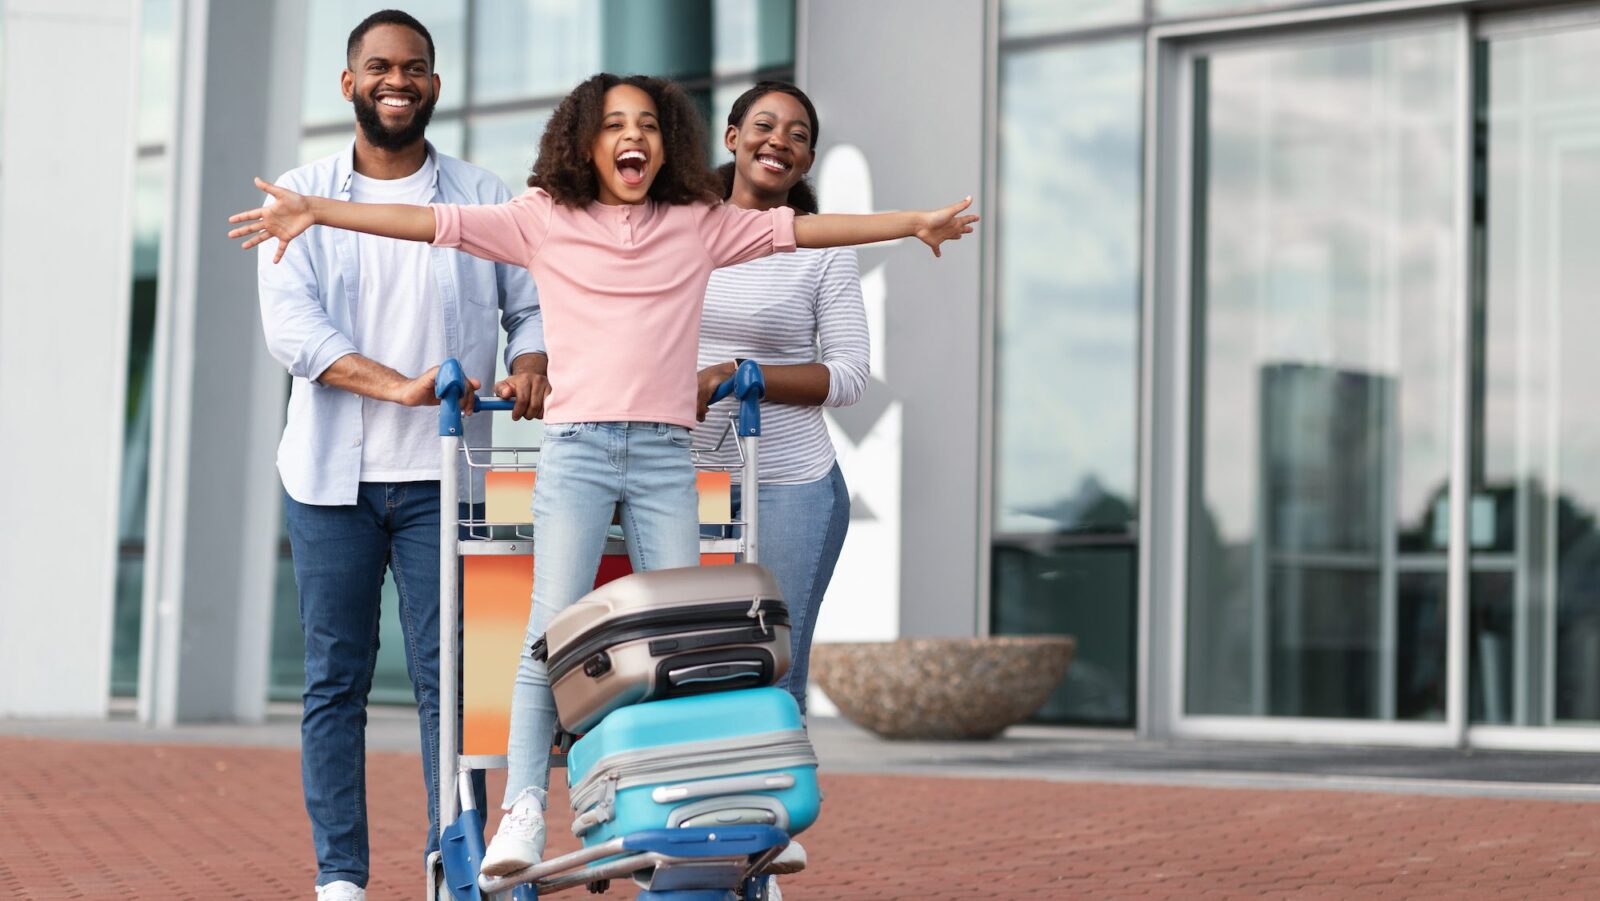 Happy kid standing on luggage cart as family leaves airport on a stopover